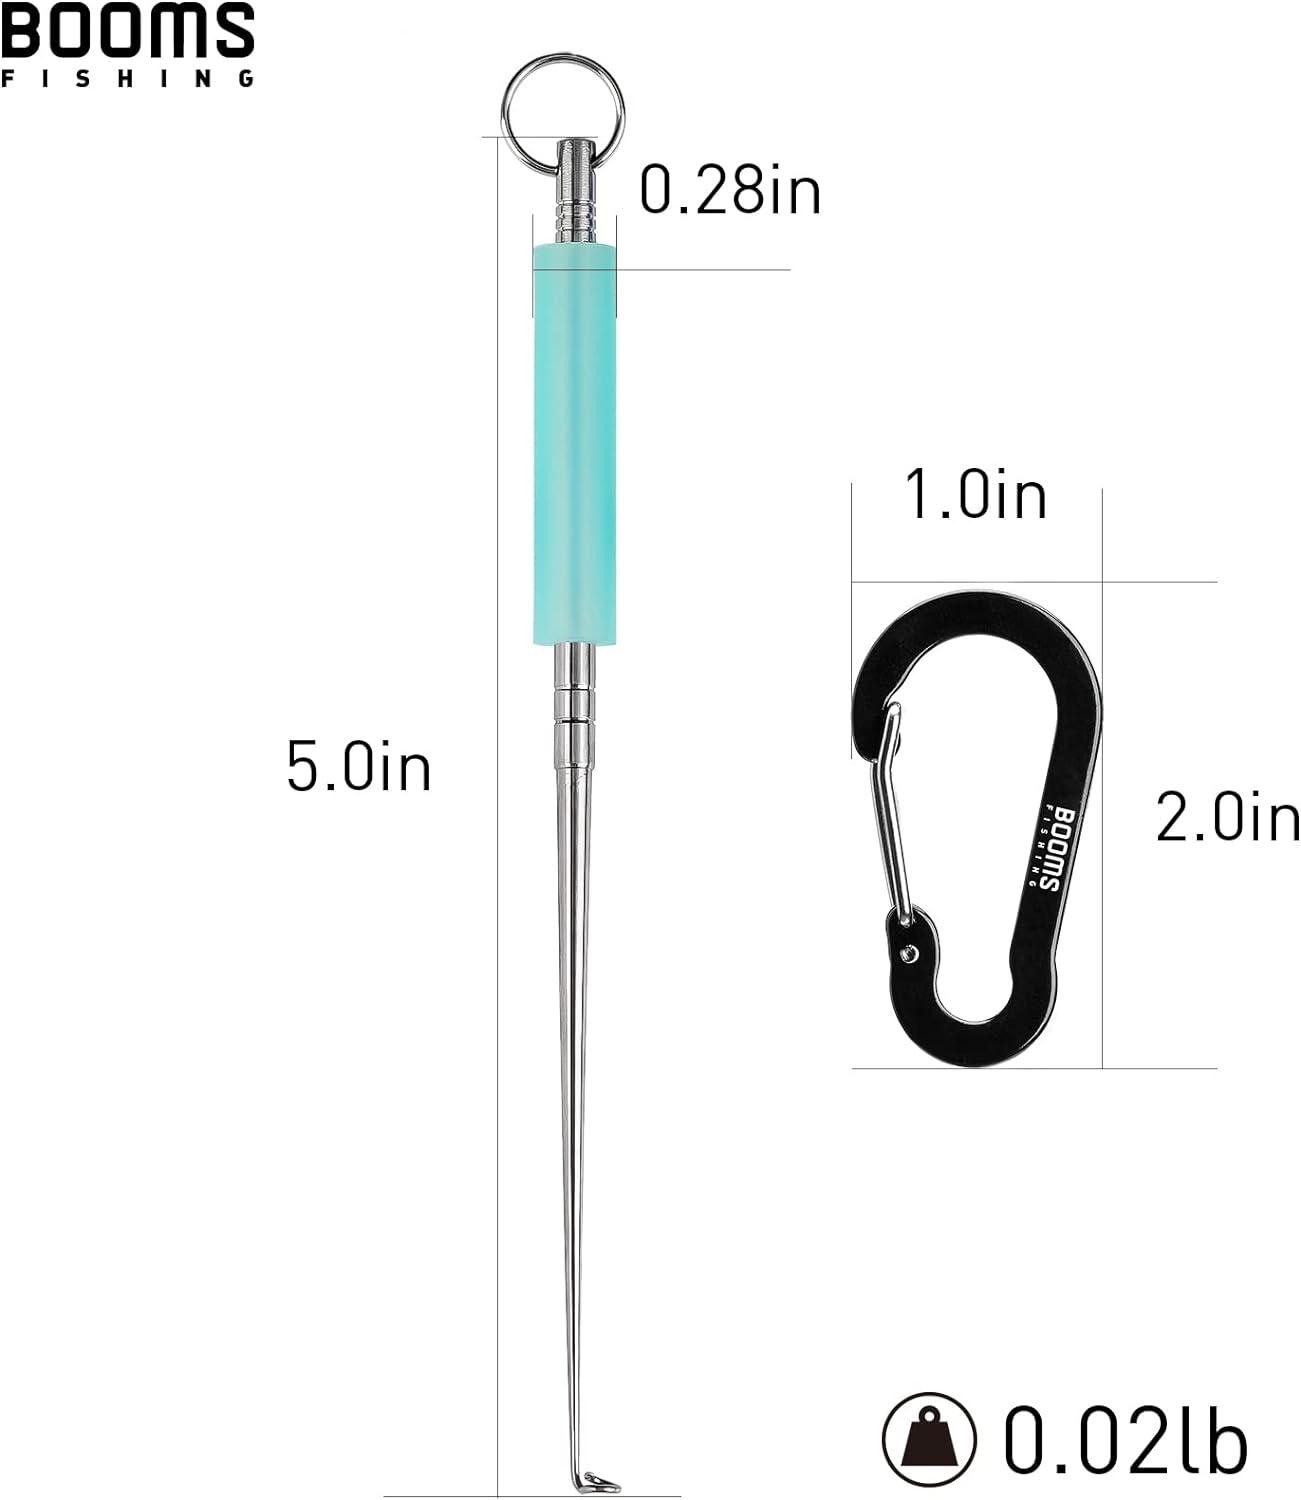 Booms Fishing R05 Fish Hook Remover, Dehooker for Saltwater and Freshwater,  7 inch Fish Hook Quick Removal Device, Portable Fish Accessories and Tools,  2pcs : : Sports & Outdoors